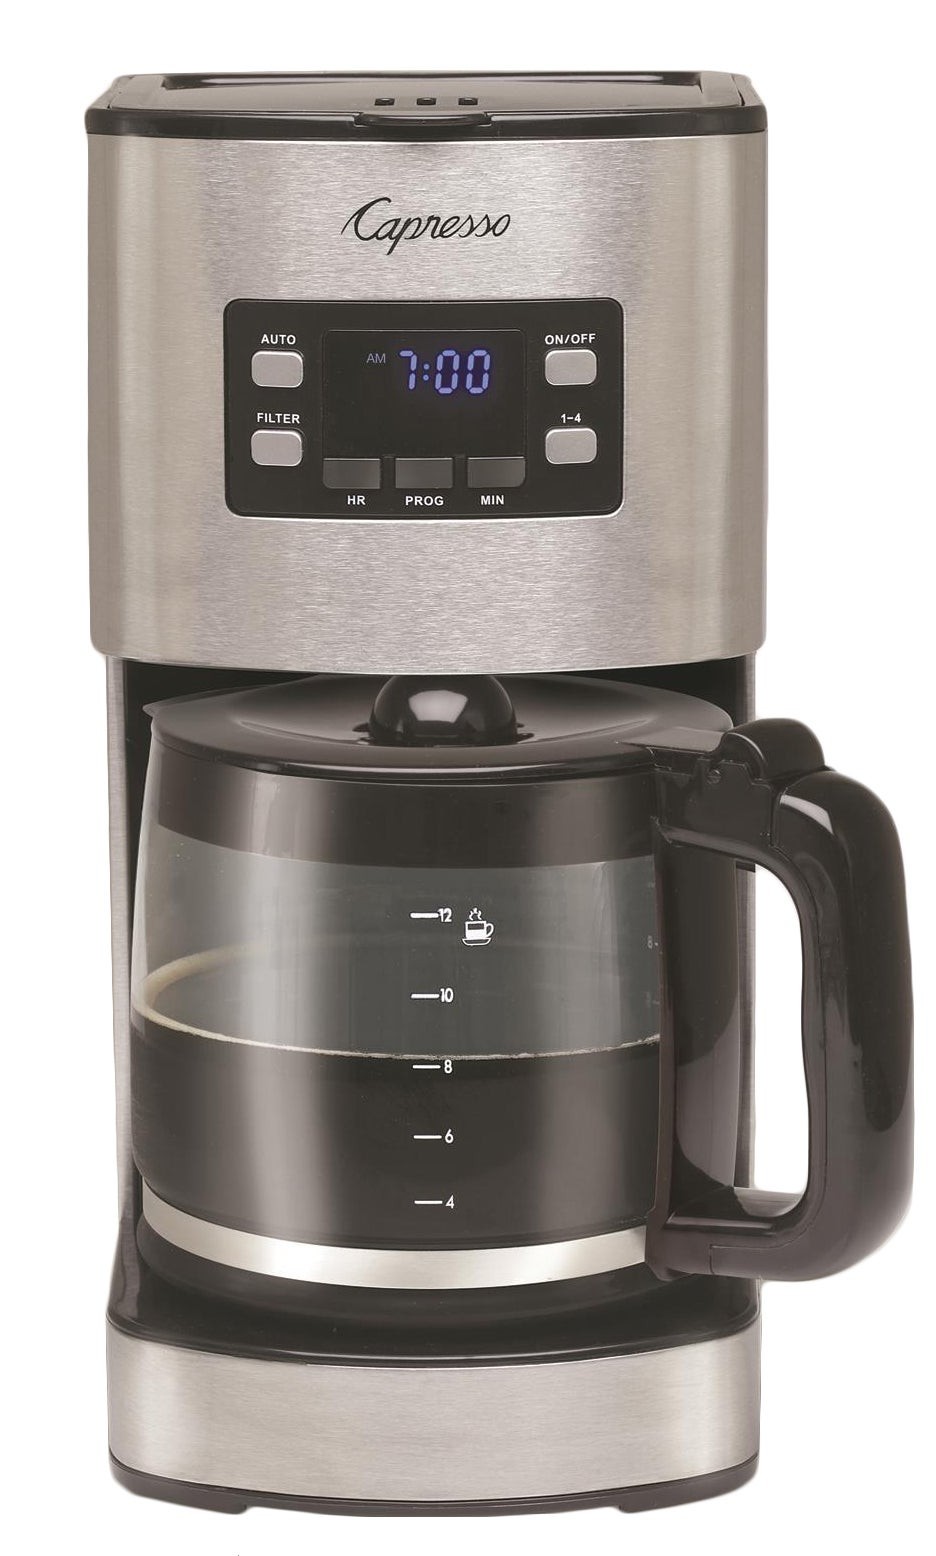 SG300 12-Cup Stainless Steel Coffeemaker